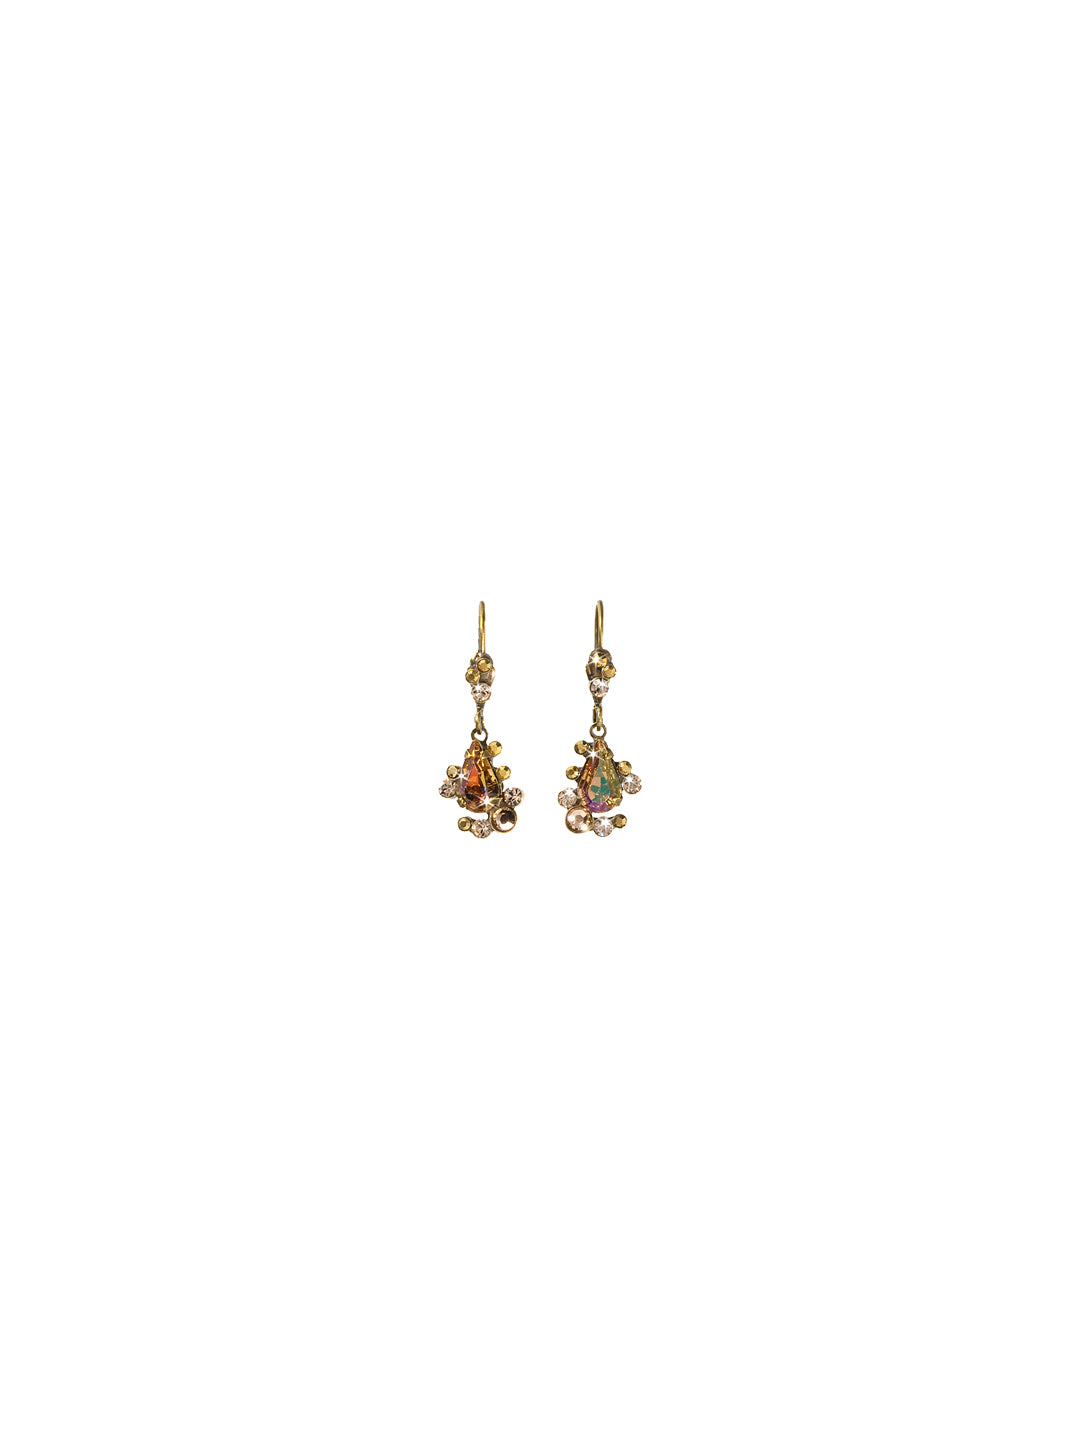 ECB38 Dangle Earrings - ECB38AGRSU - <p>The ECB38 Earrings are a simple, yet galmorous look. From Sorrelli's Raw Sugar collection in our Antique Gold-tone finish.</p>